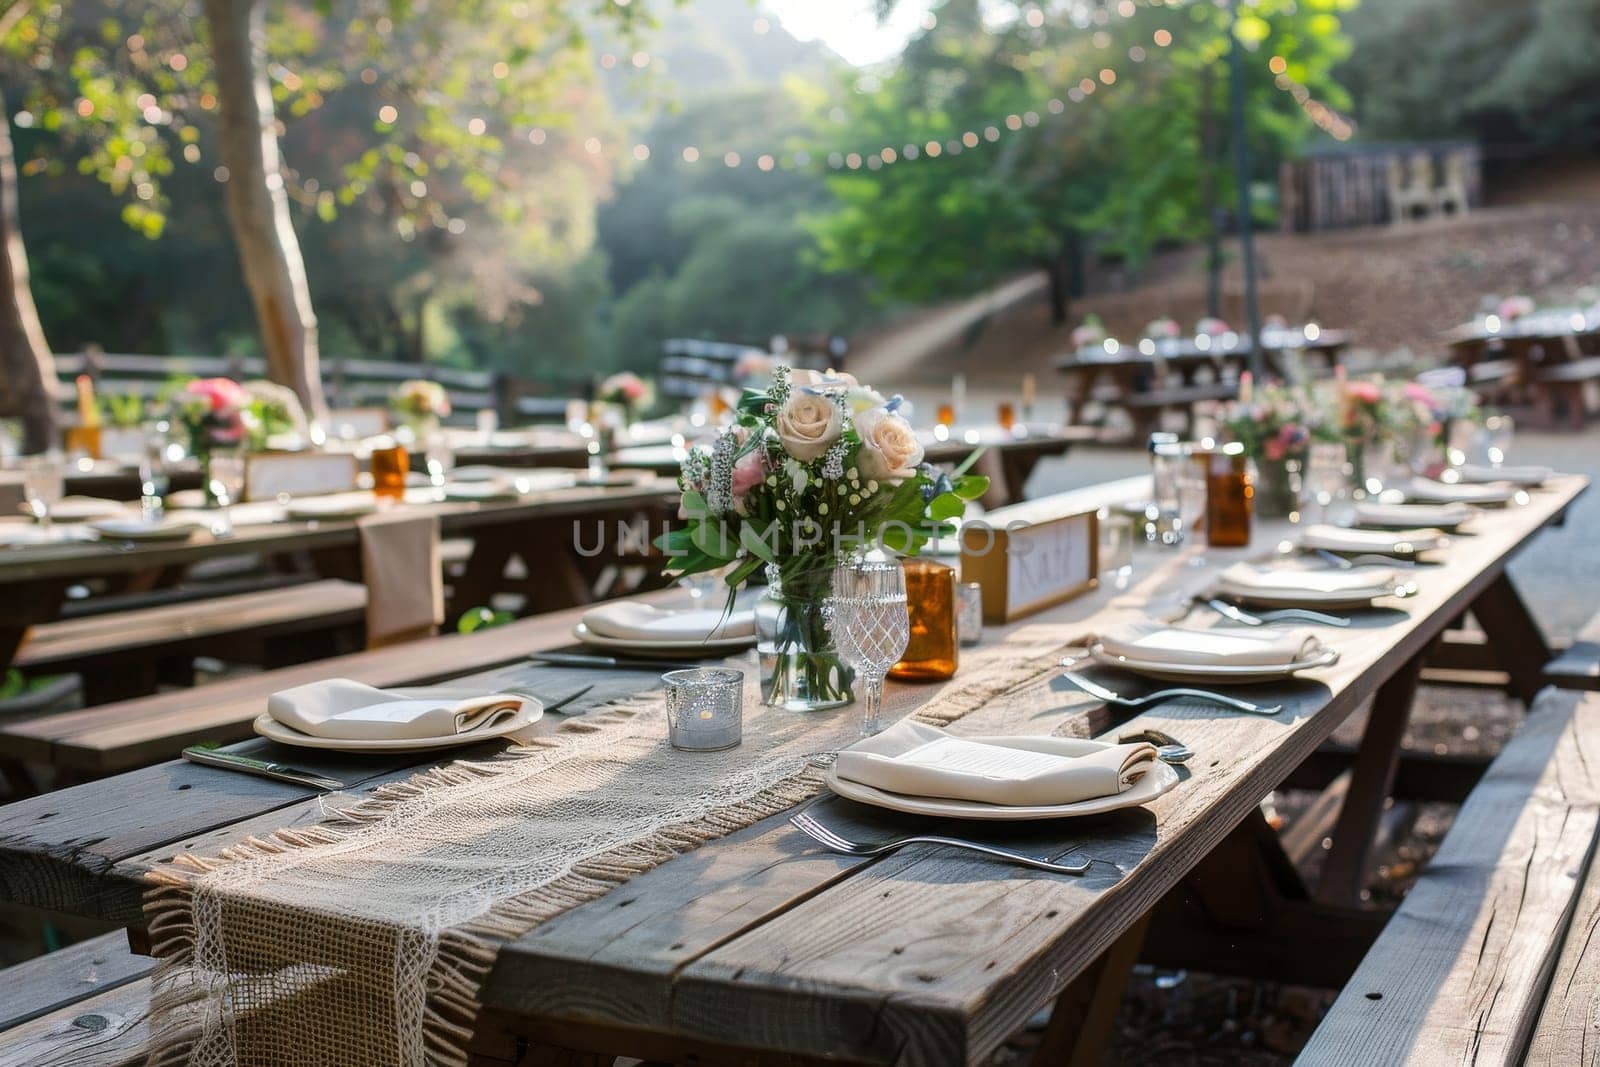 A rustic outdoor wedding reception with a long table set with white plates, wine glasses, and silverware. The table is surrounded by potted plants and flowers, creating a warm and inviting atmosphere